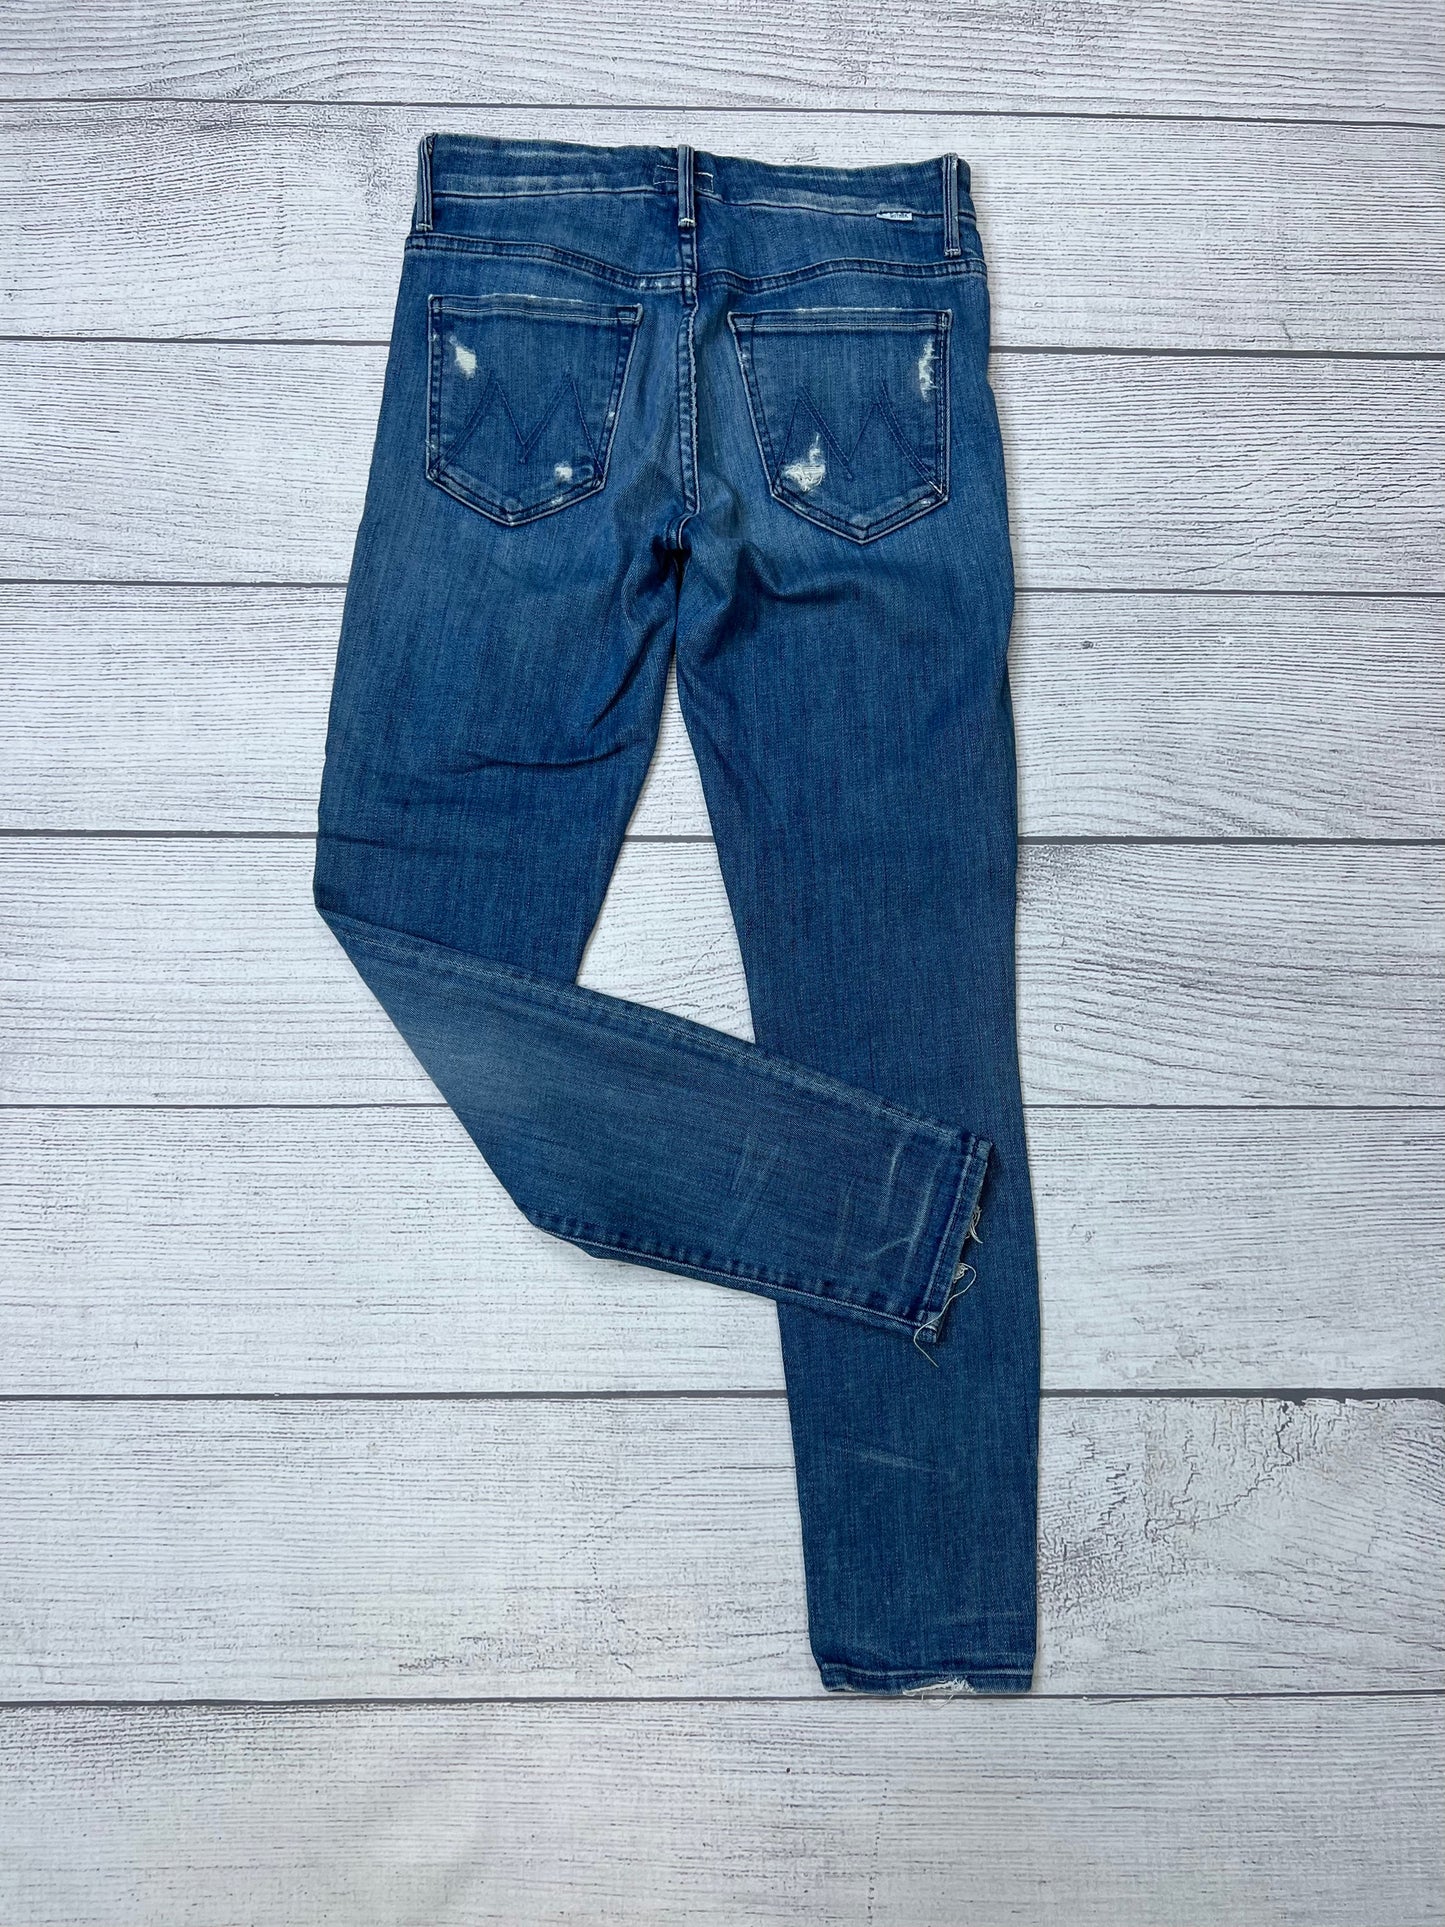 Jeans Designer By Mother Jeans  Size: 2